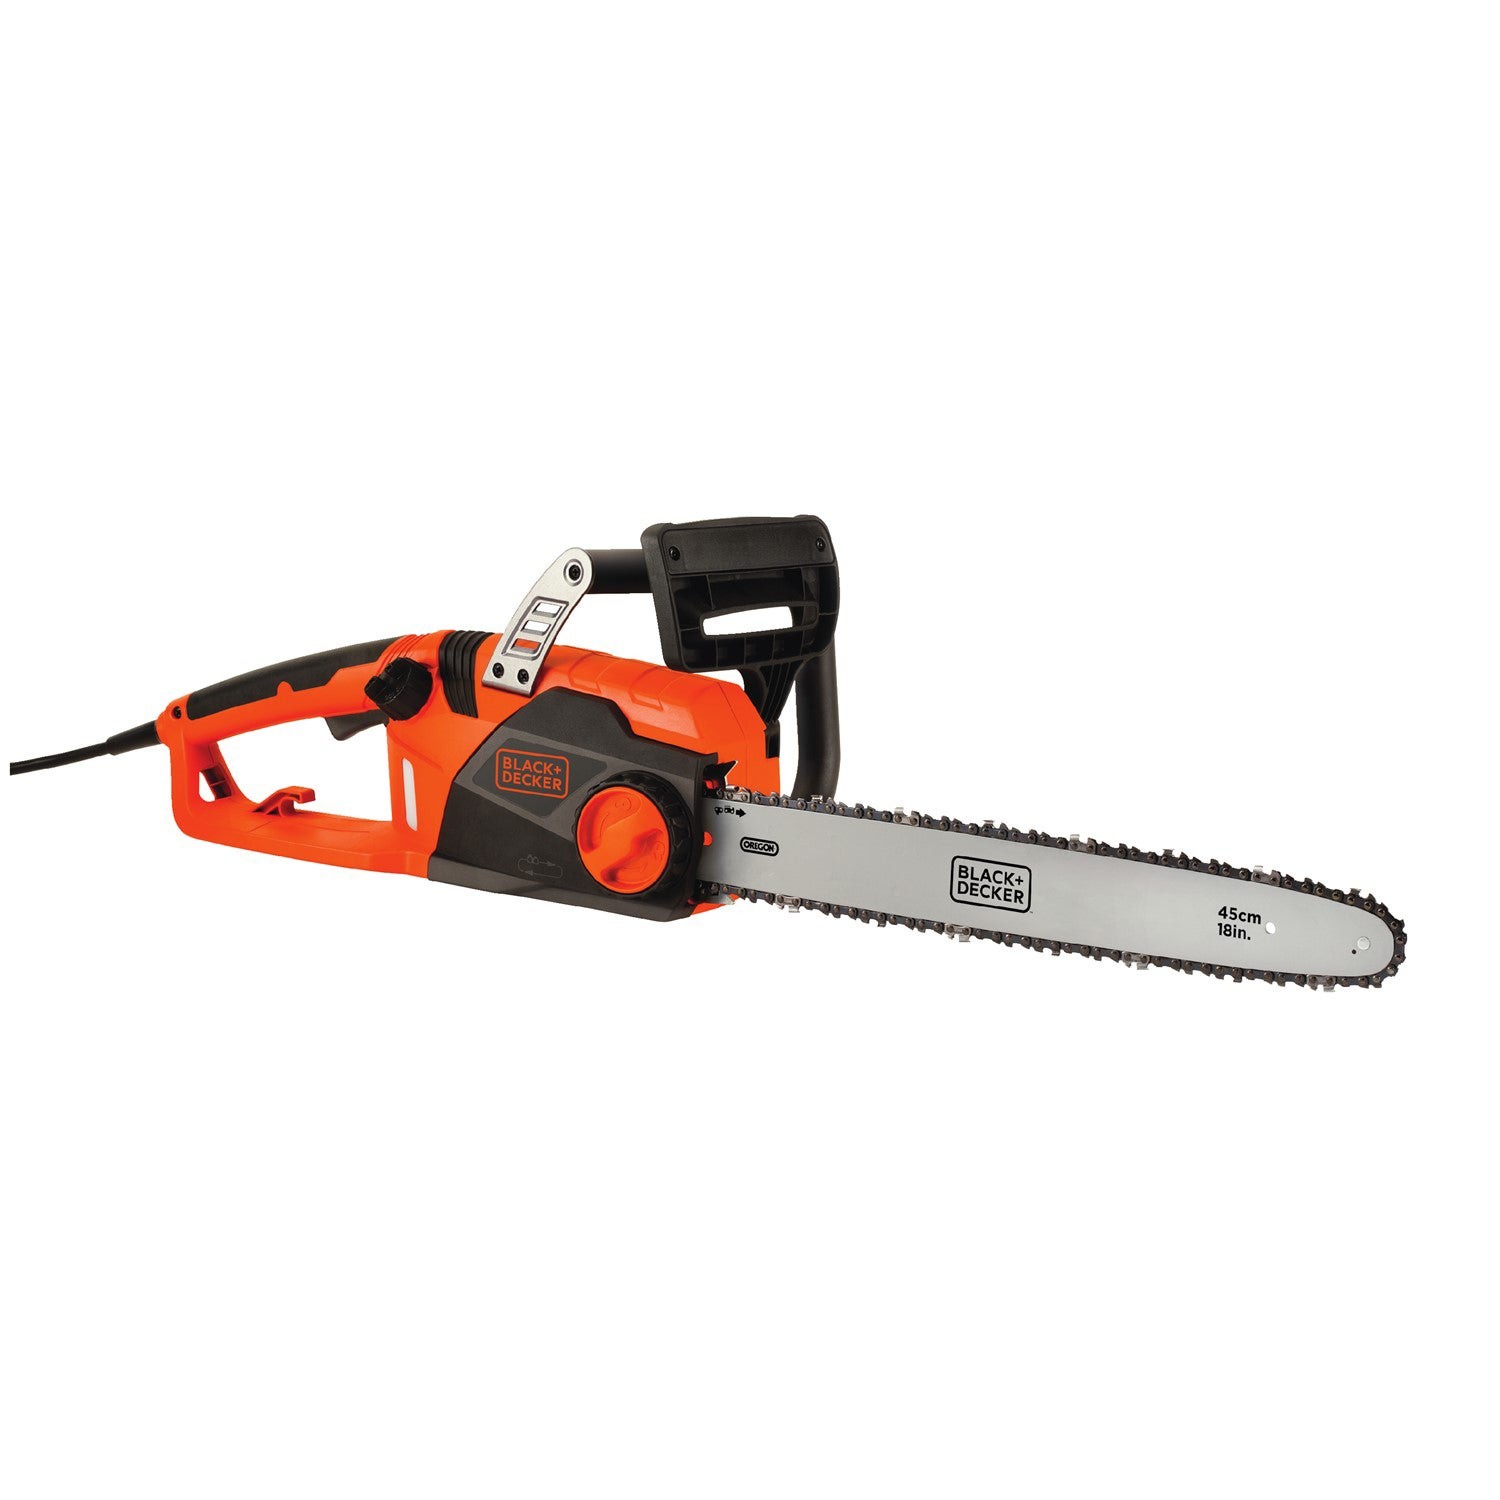 15 Amp 18" Corded Chainsaw